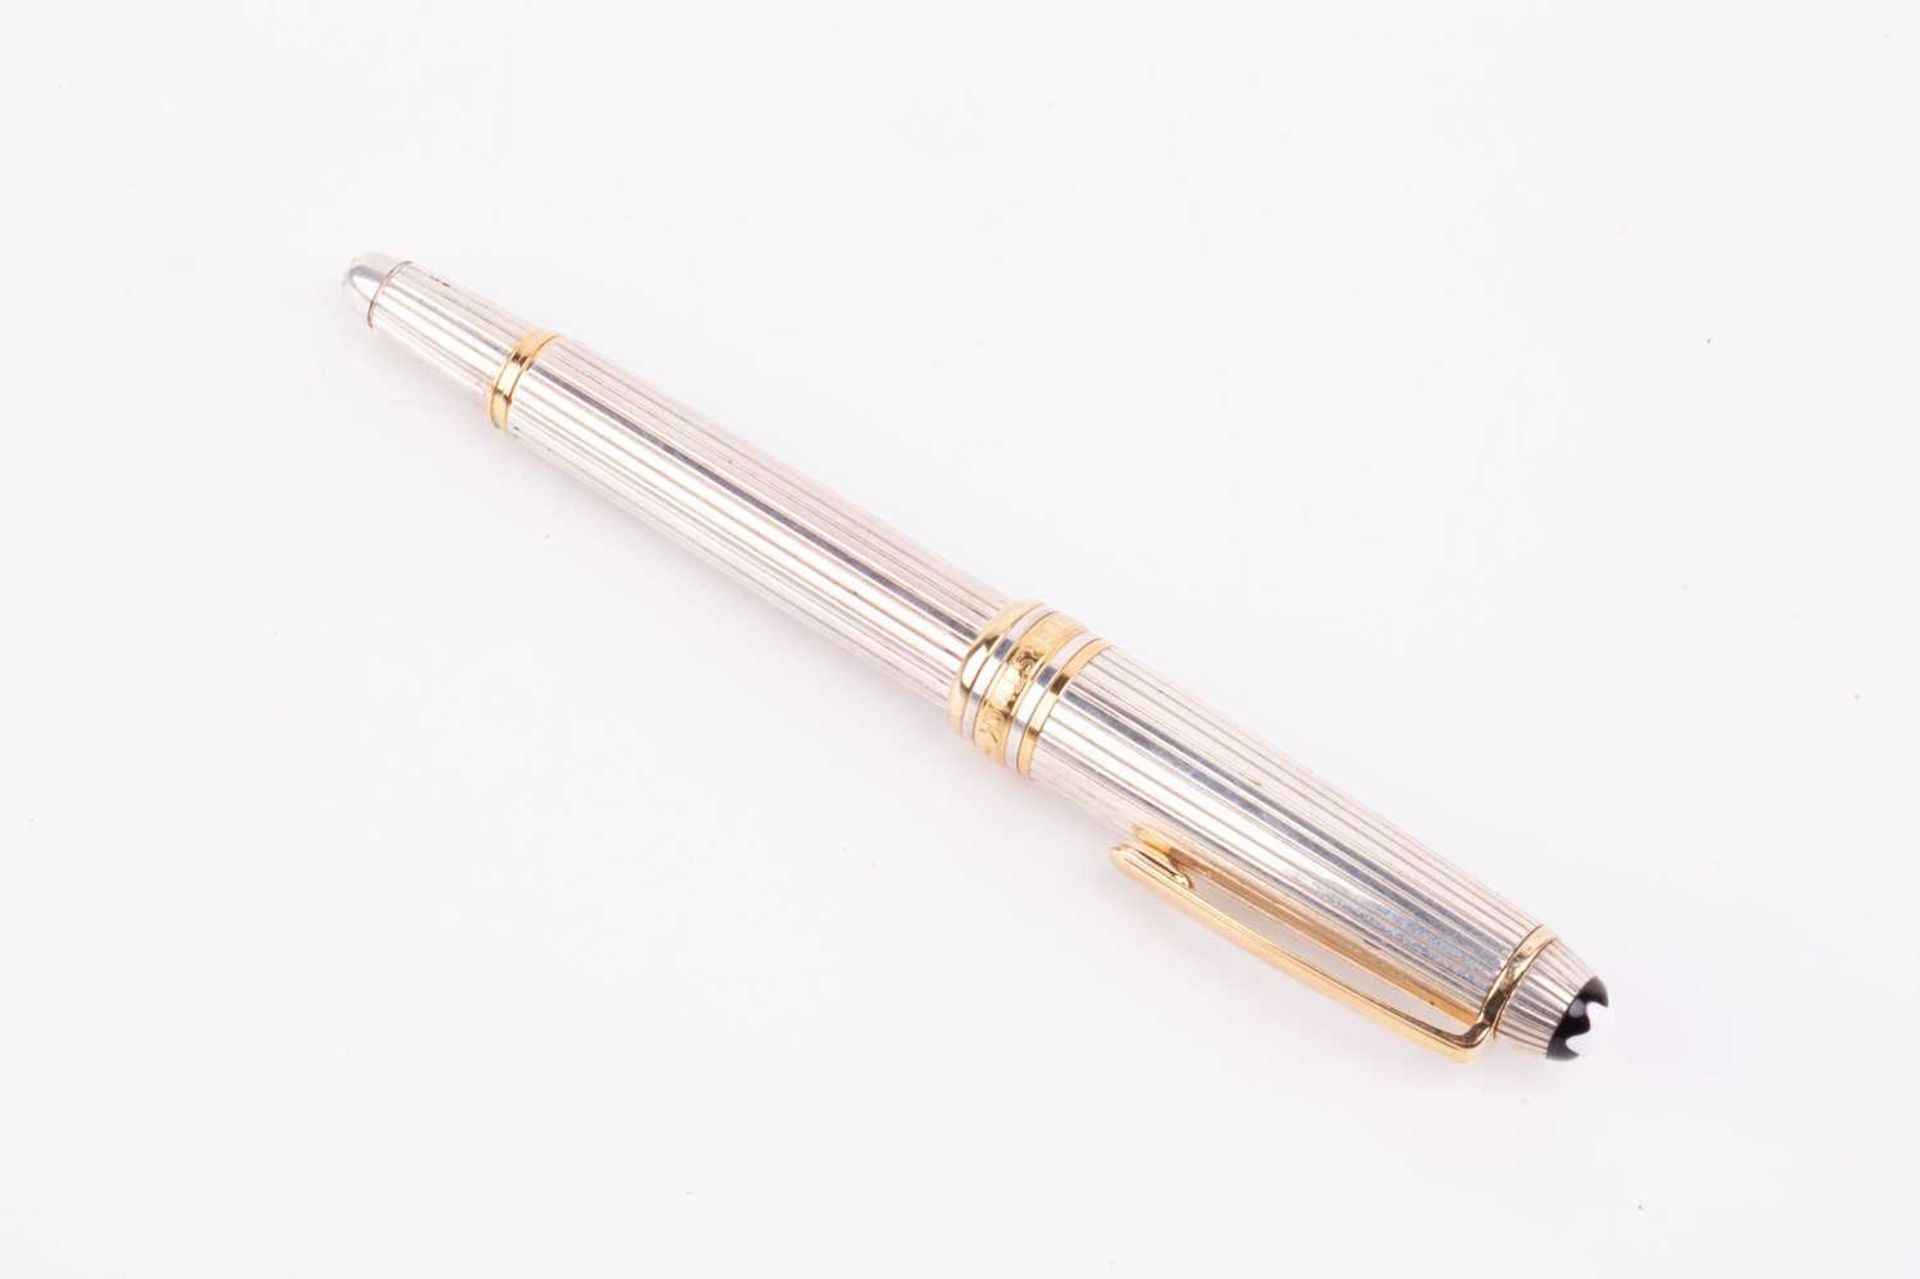 Montblanc Meisterstück silver fountain pen with gold-tone hardware, emblem inlaid into pull-off - Image 2 of 7